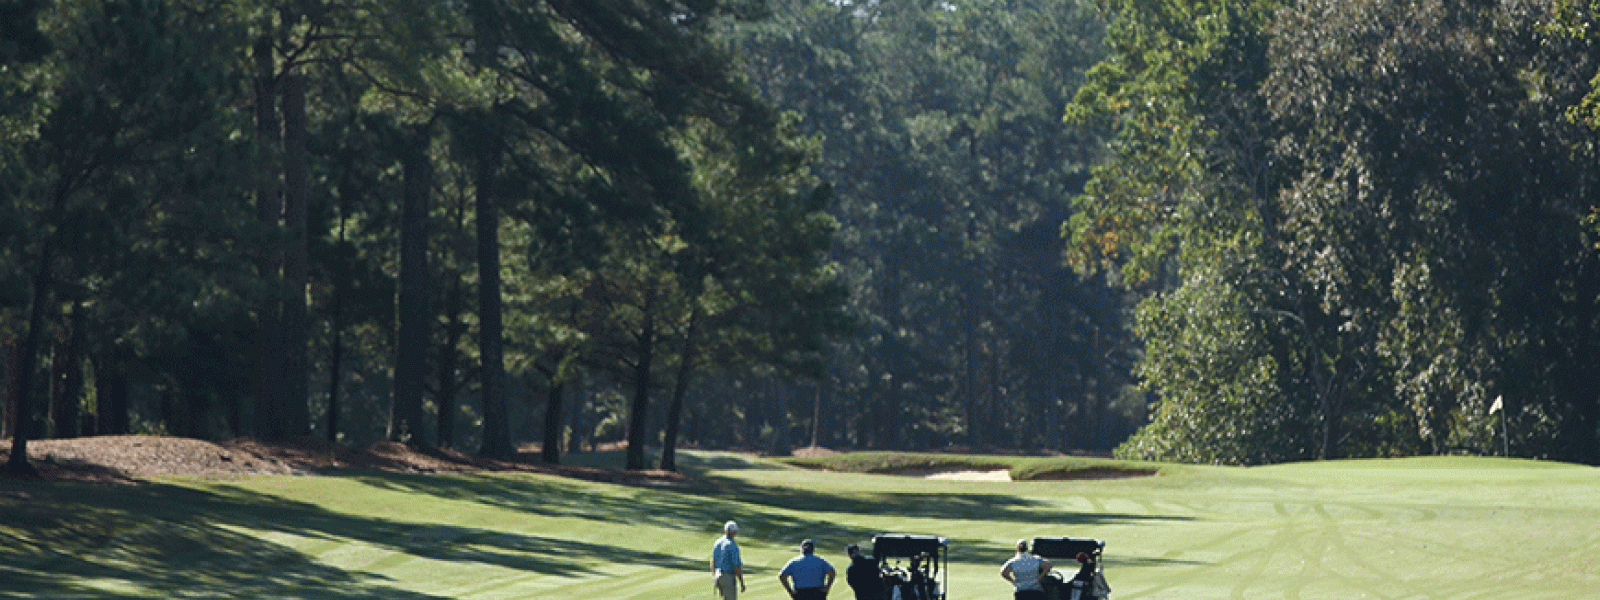 The beautiful Columbia Country Club was the site for the CIU Golf Classic.